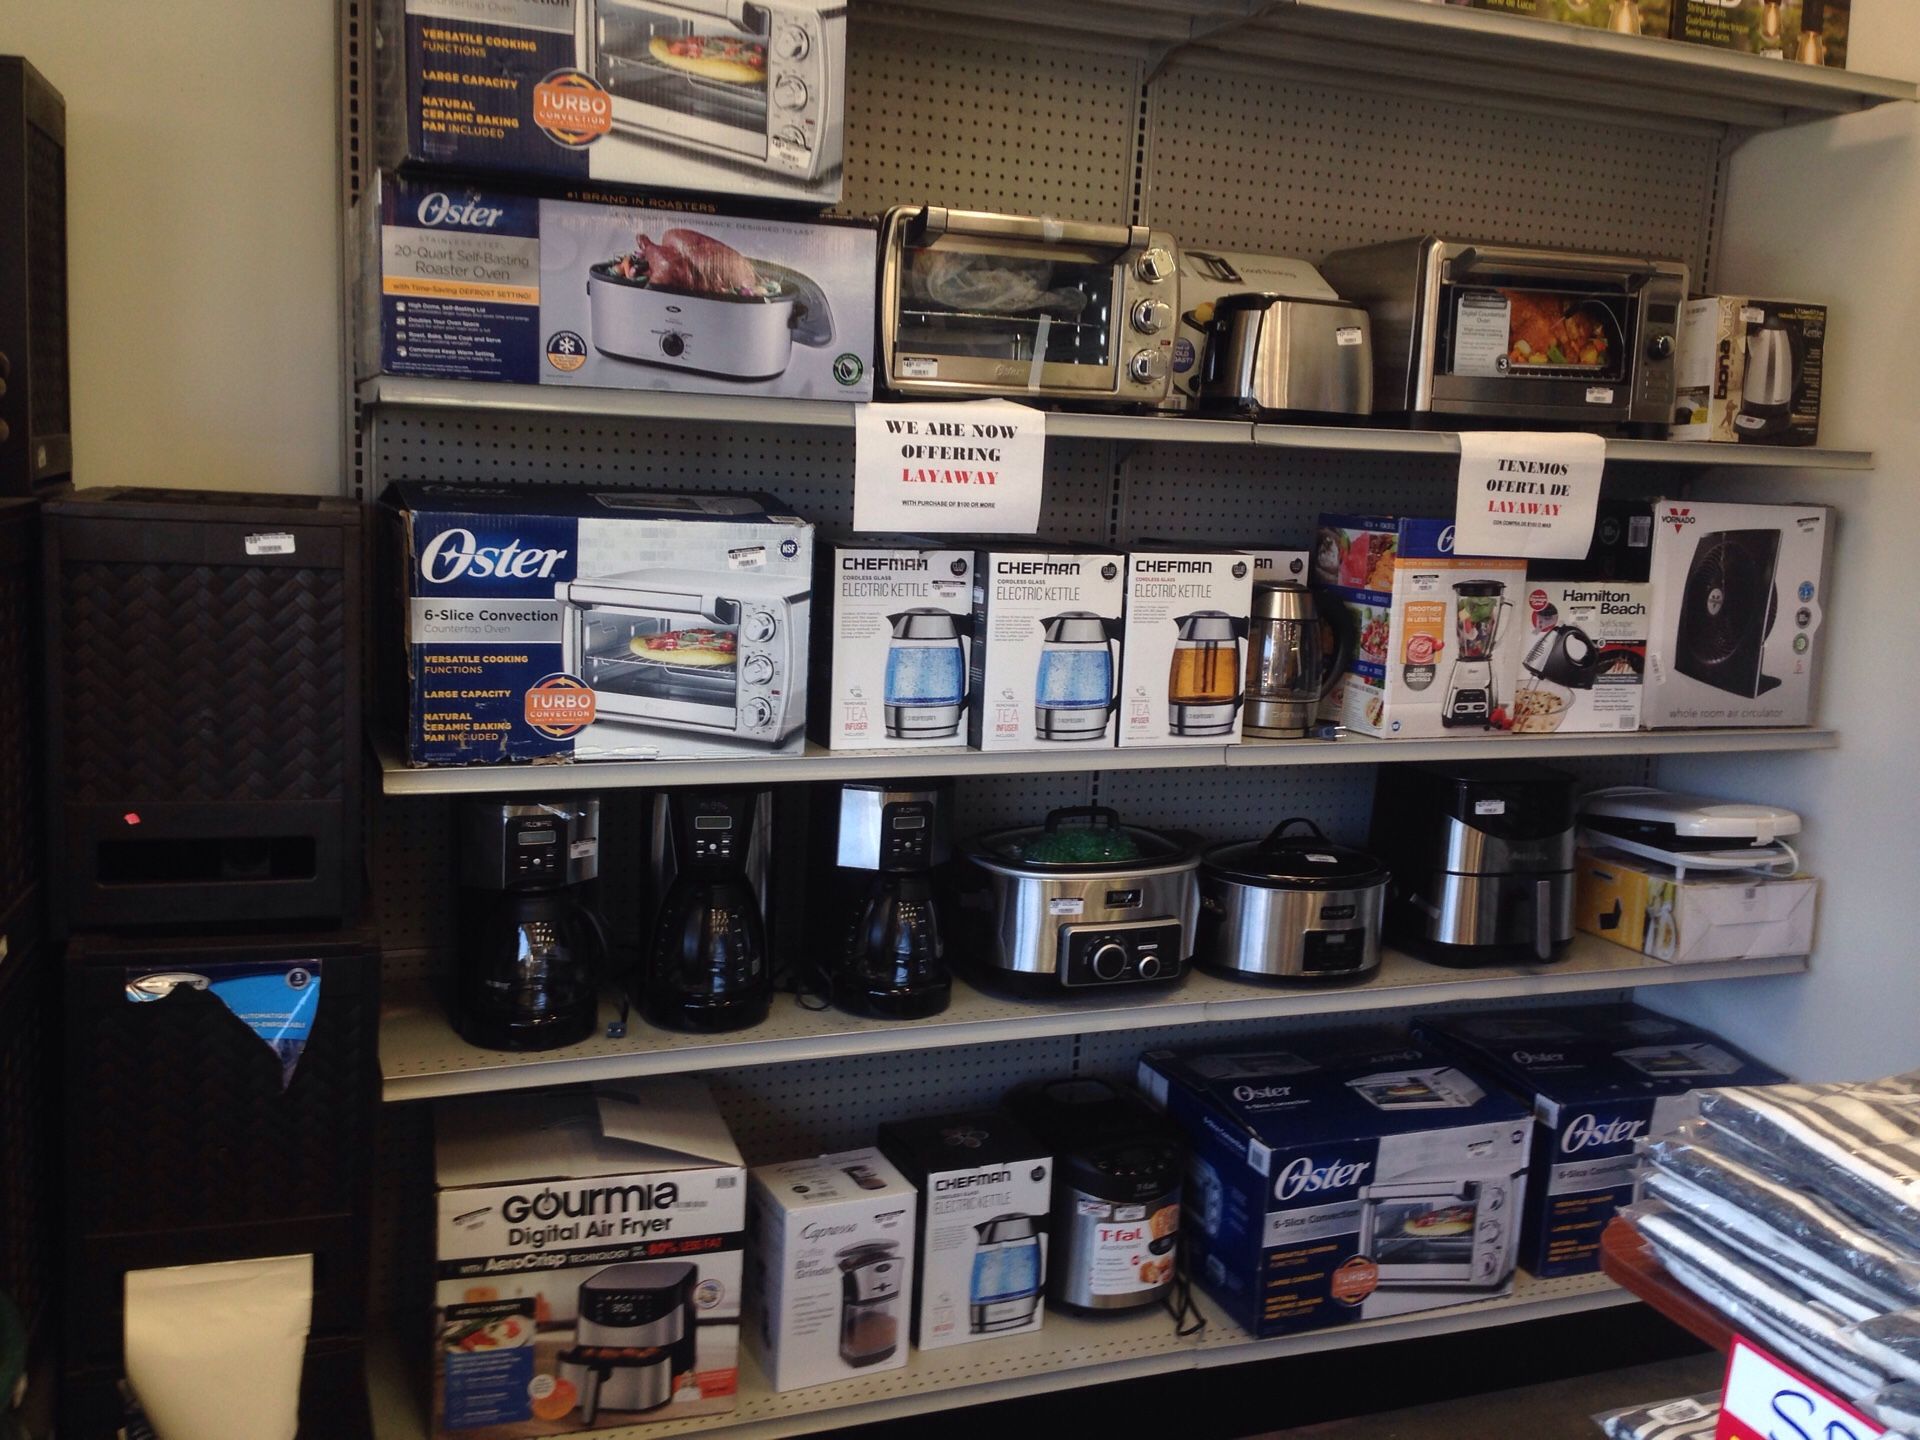 Appliances toasters crockpots and much more